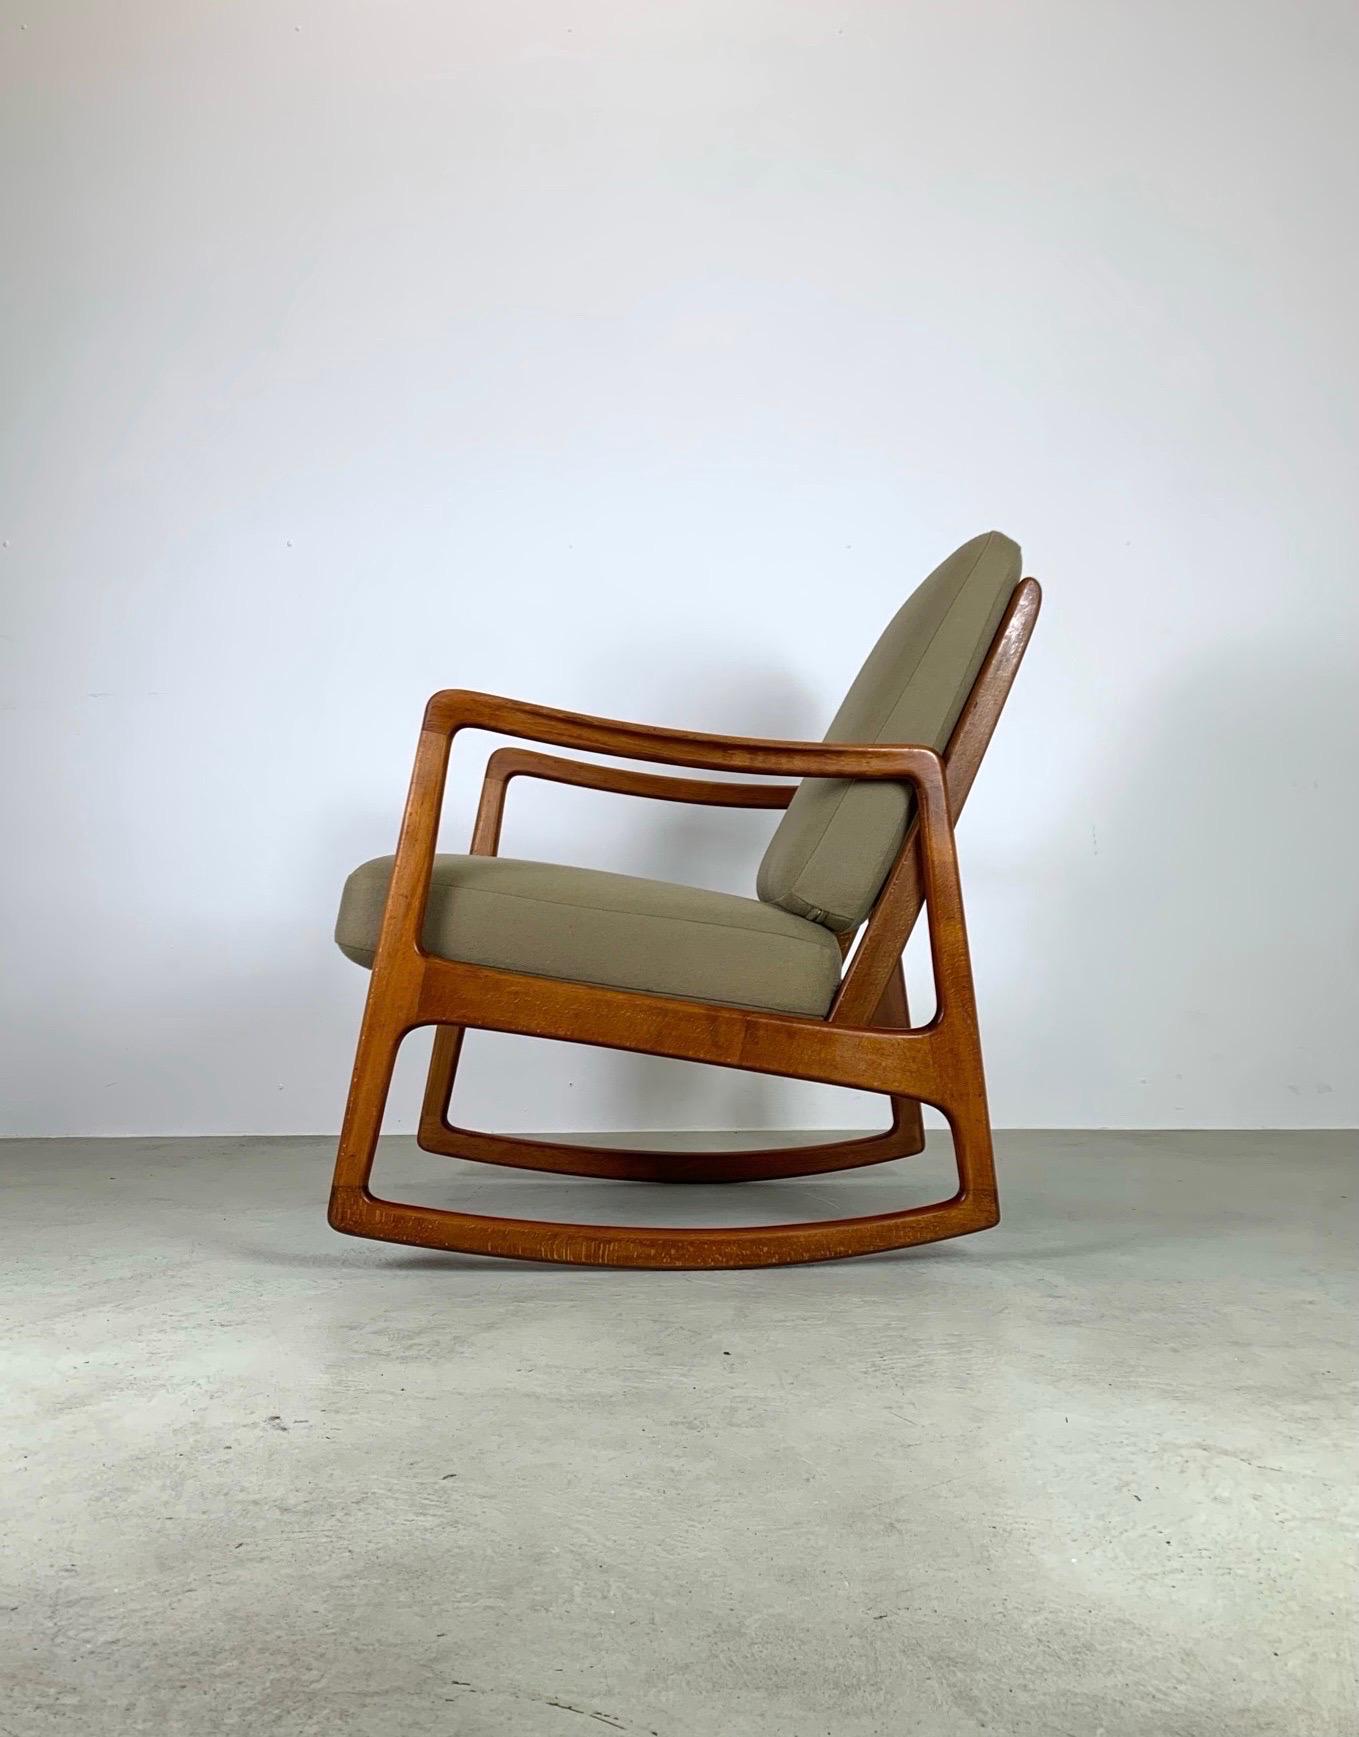 Rare mid-century rocking chair designed by Danish Professor Ole Wanscher. Made in Denmark by France & Søn during the 1950s. It maintains the manufacturer’s mark and features a sturdy teak wooden frame with a slated open back and angled legs for an